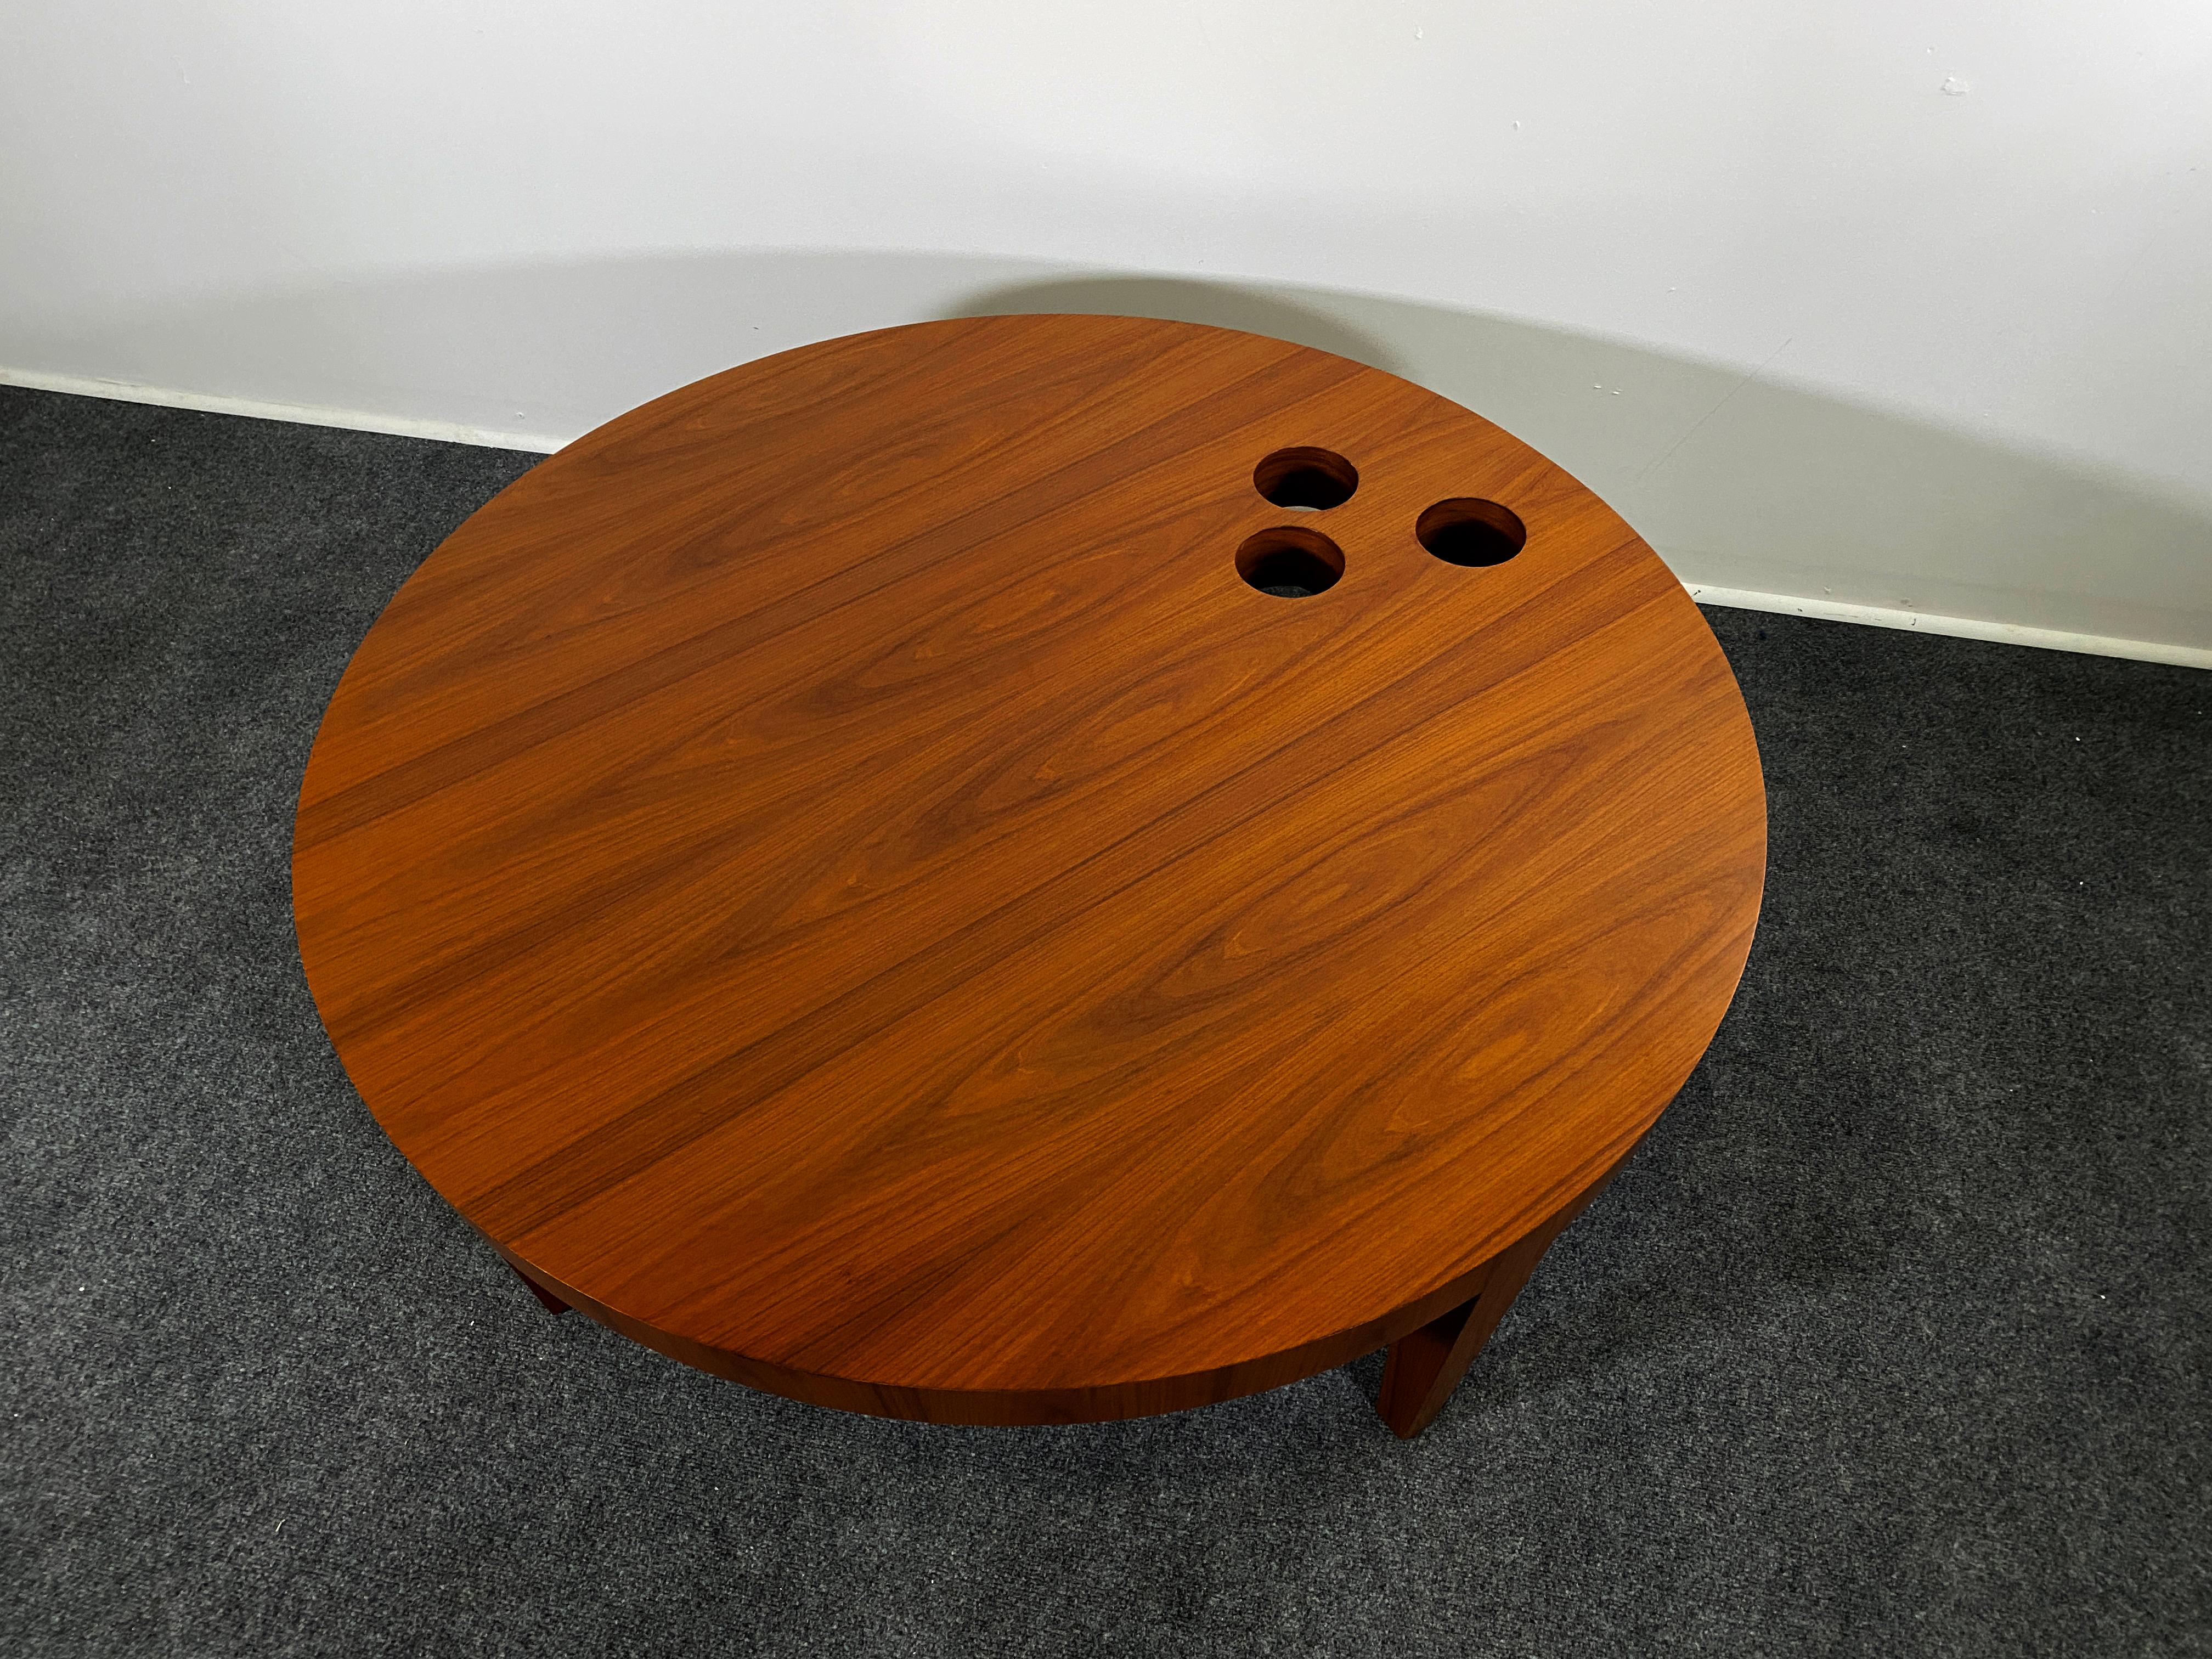 Unique Bespoke American Walnut Round Coffee Table with Round Cutouts In Good Condition For Sale In Hollywood, FL